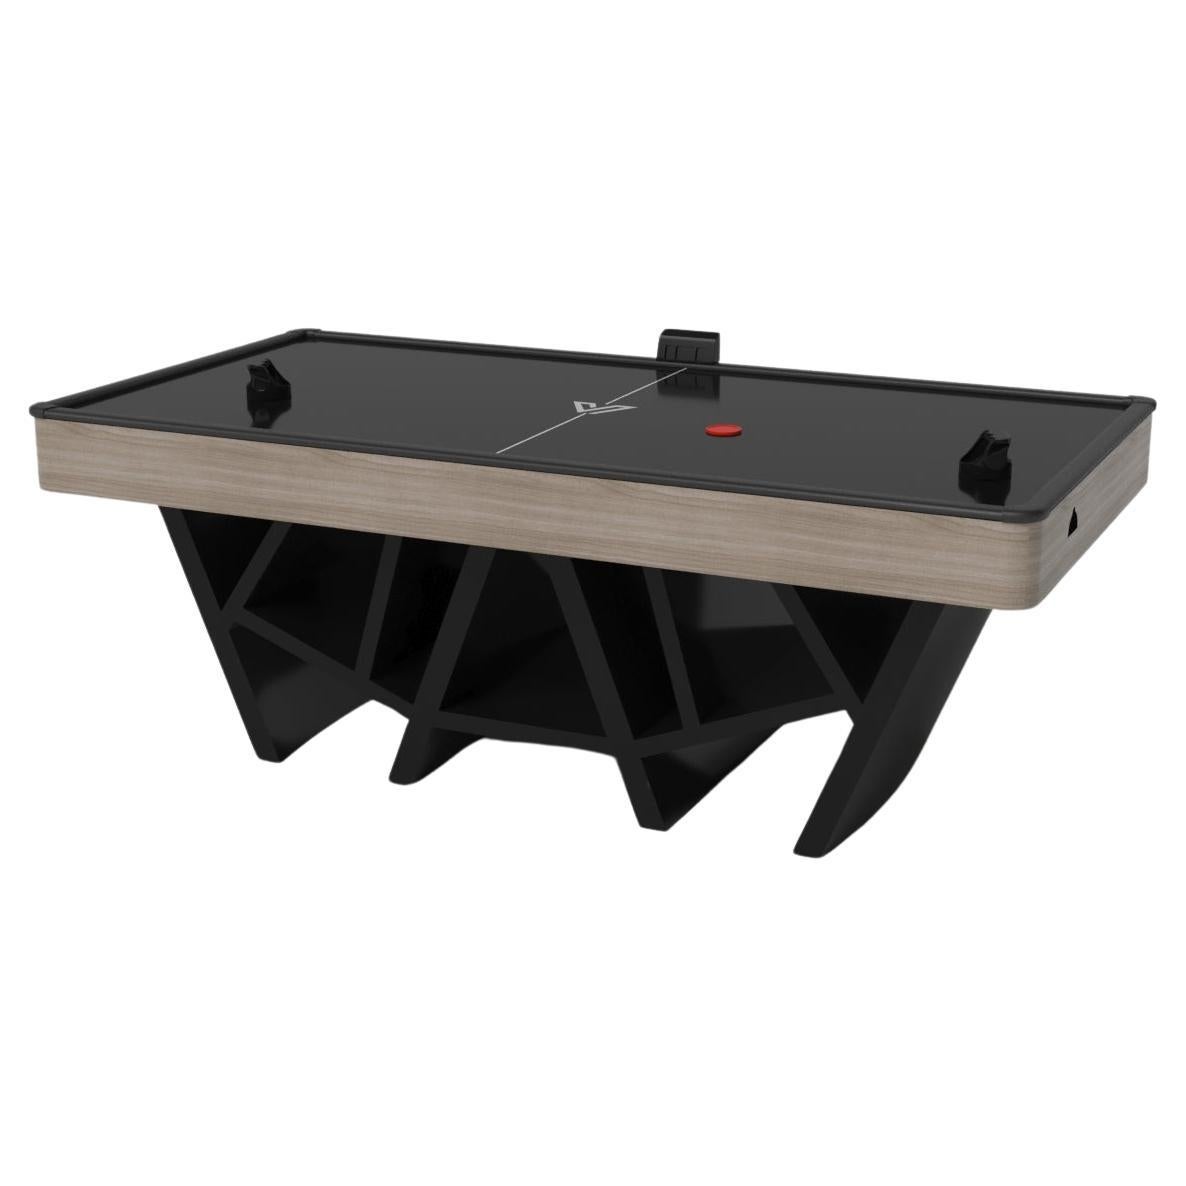 Elevate Customs Maze Air Hockey Tables / Solid White Oak Wood in 7' -Made in USA